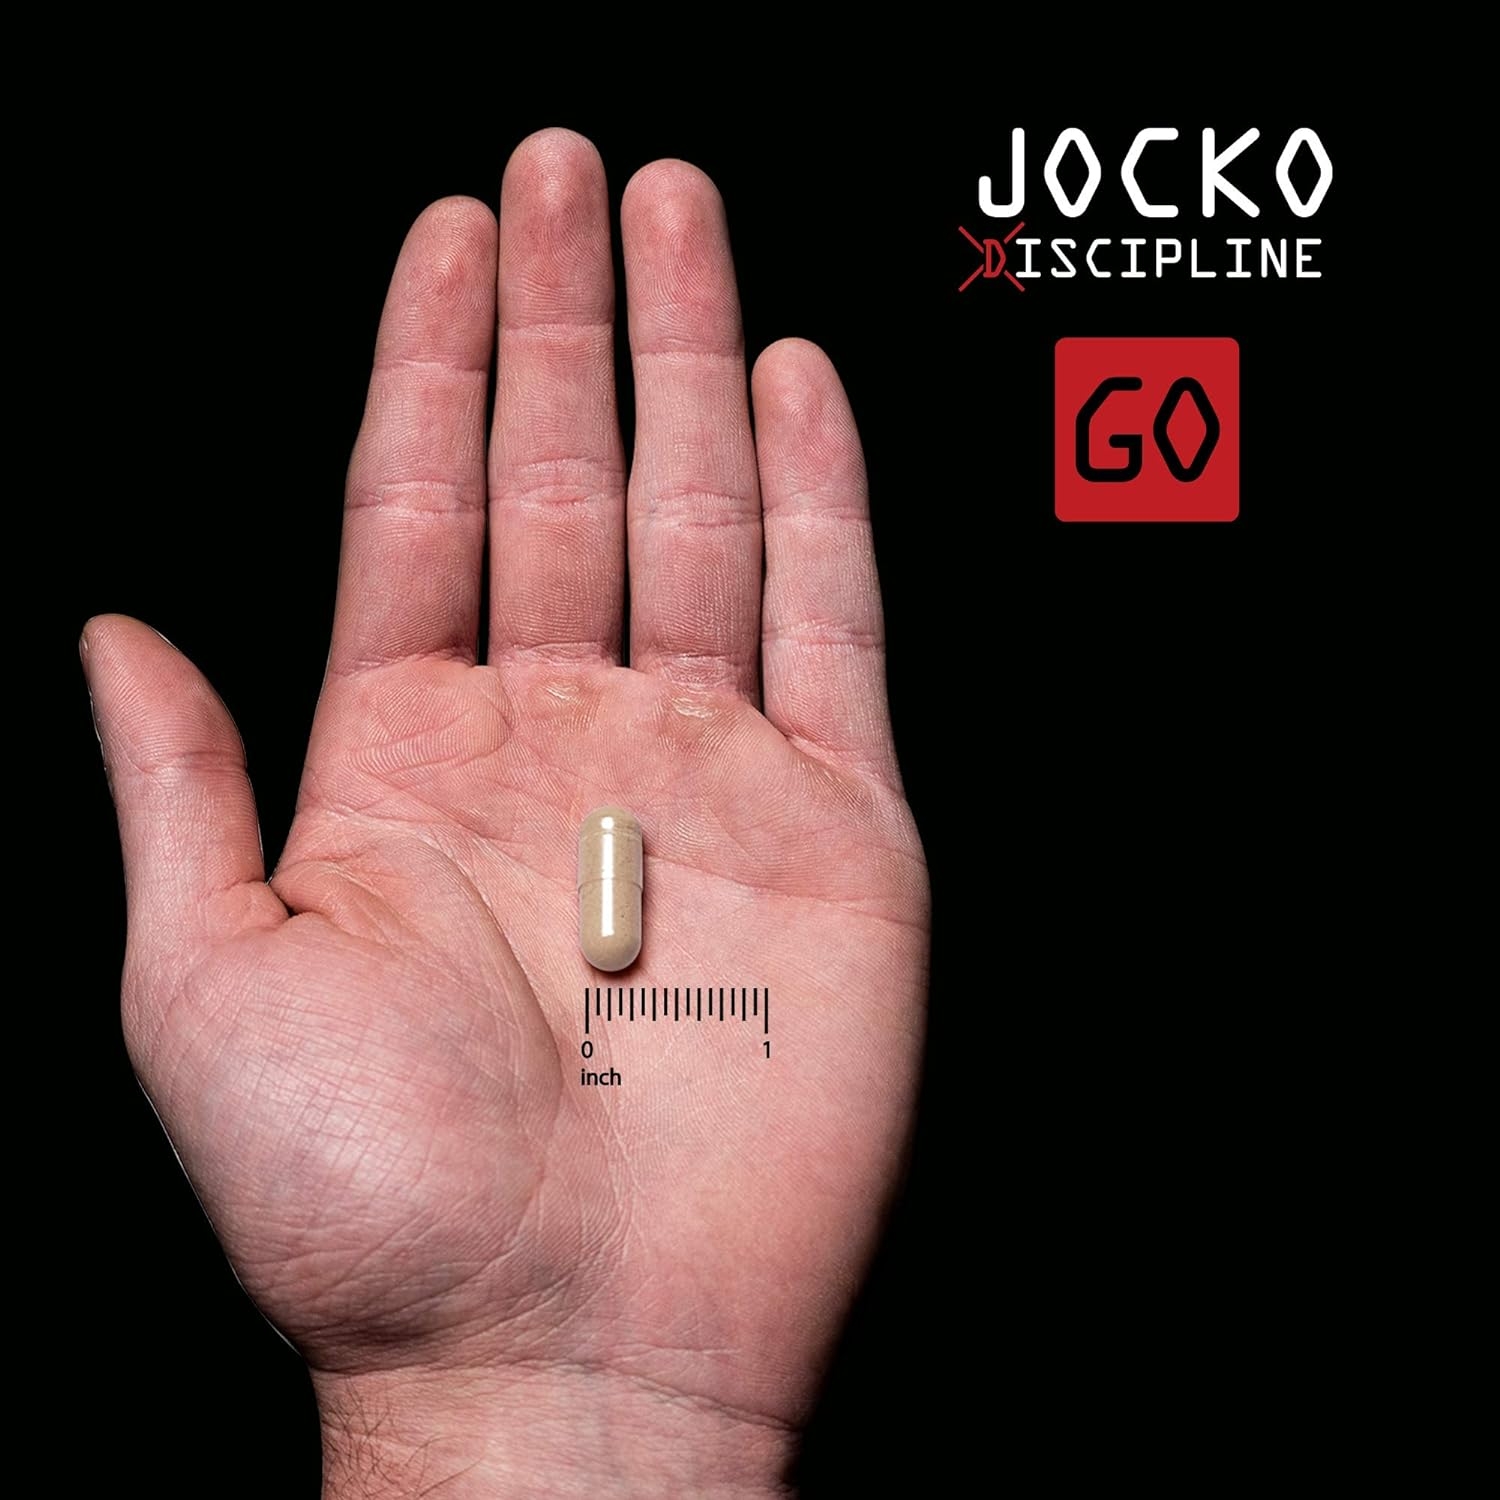 Jocko Discipline GO Concentrated Nootropic Brain Support - Preworkout Energy & Focus Booster - 30 Day Boost